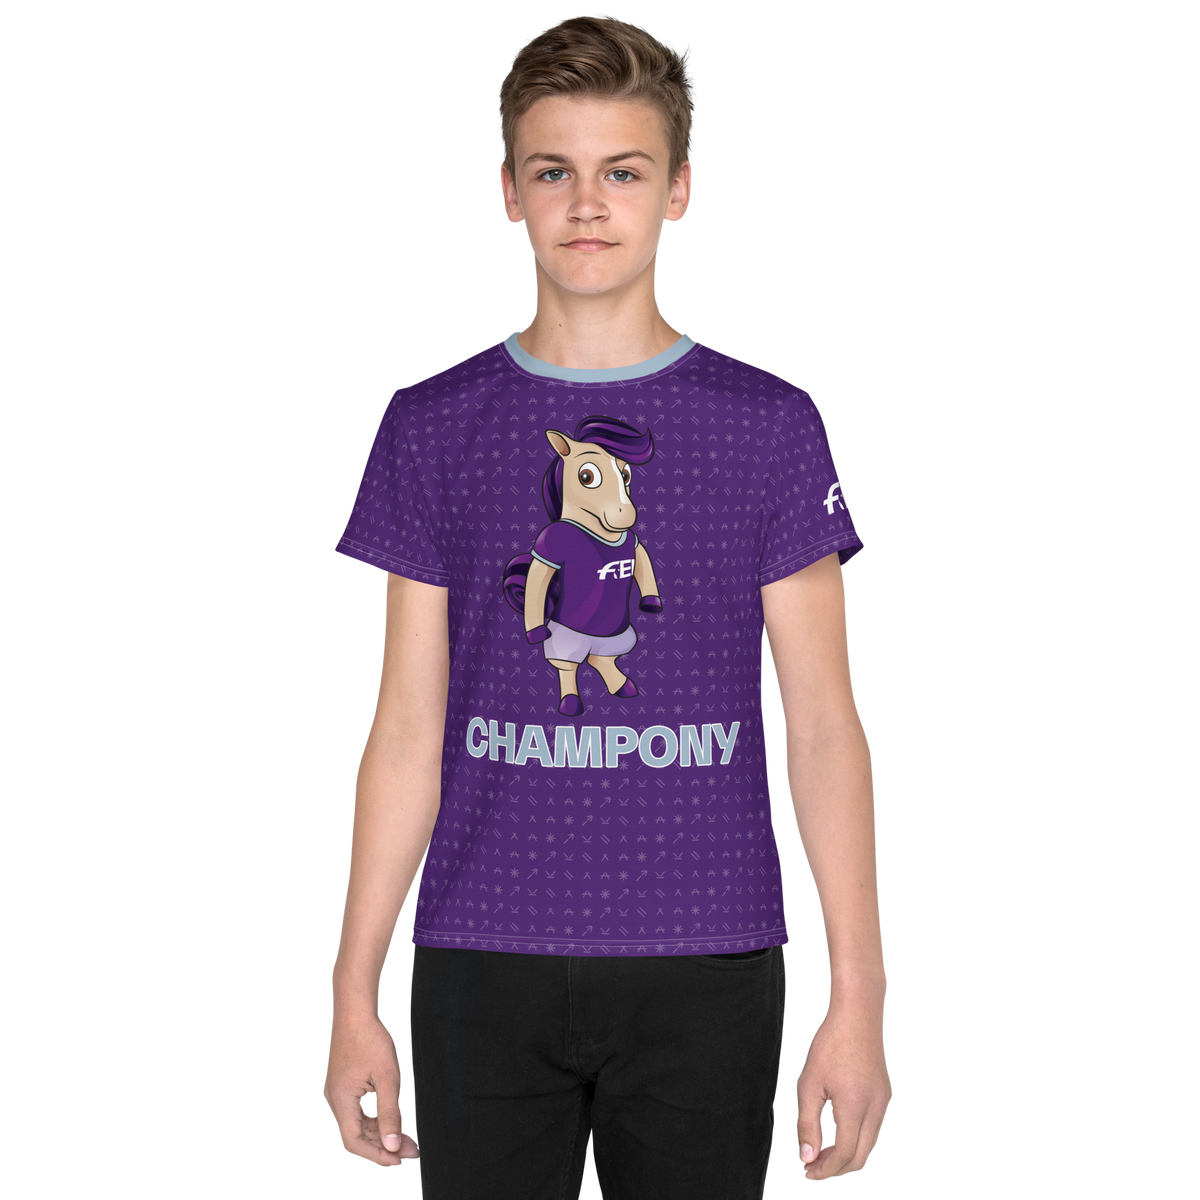 FEI Champony Youth Performance T-Shirt FEI Official Store